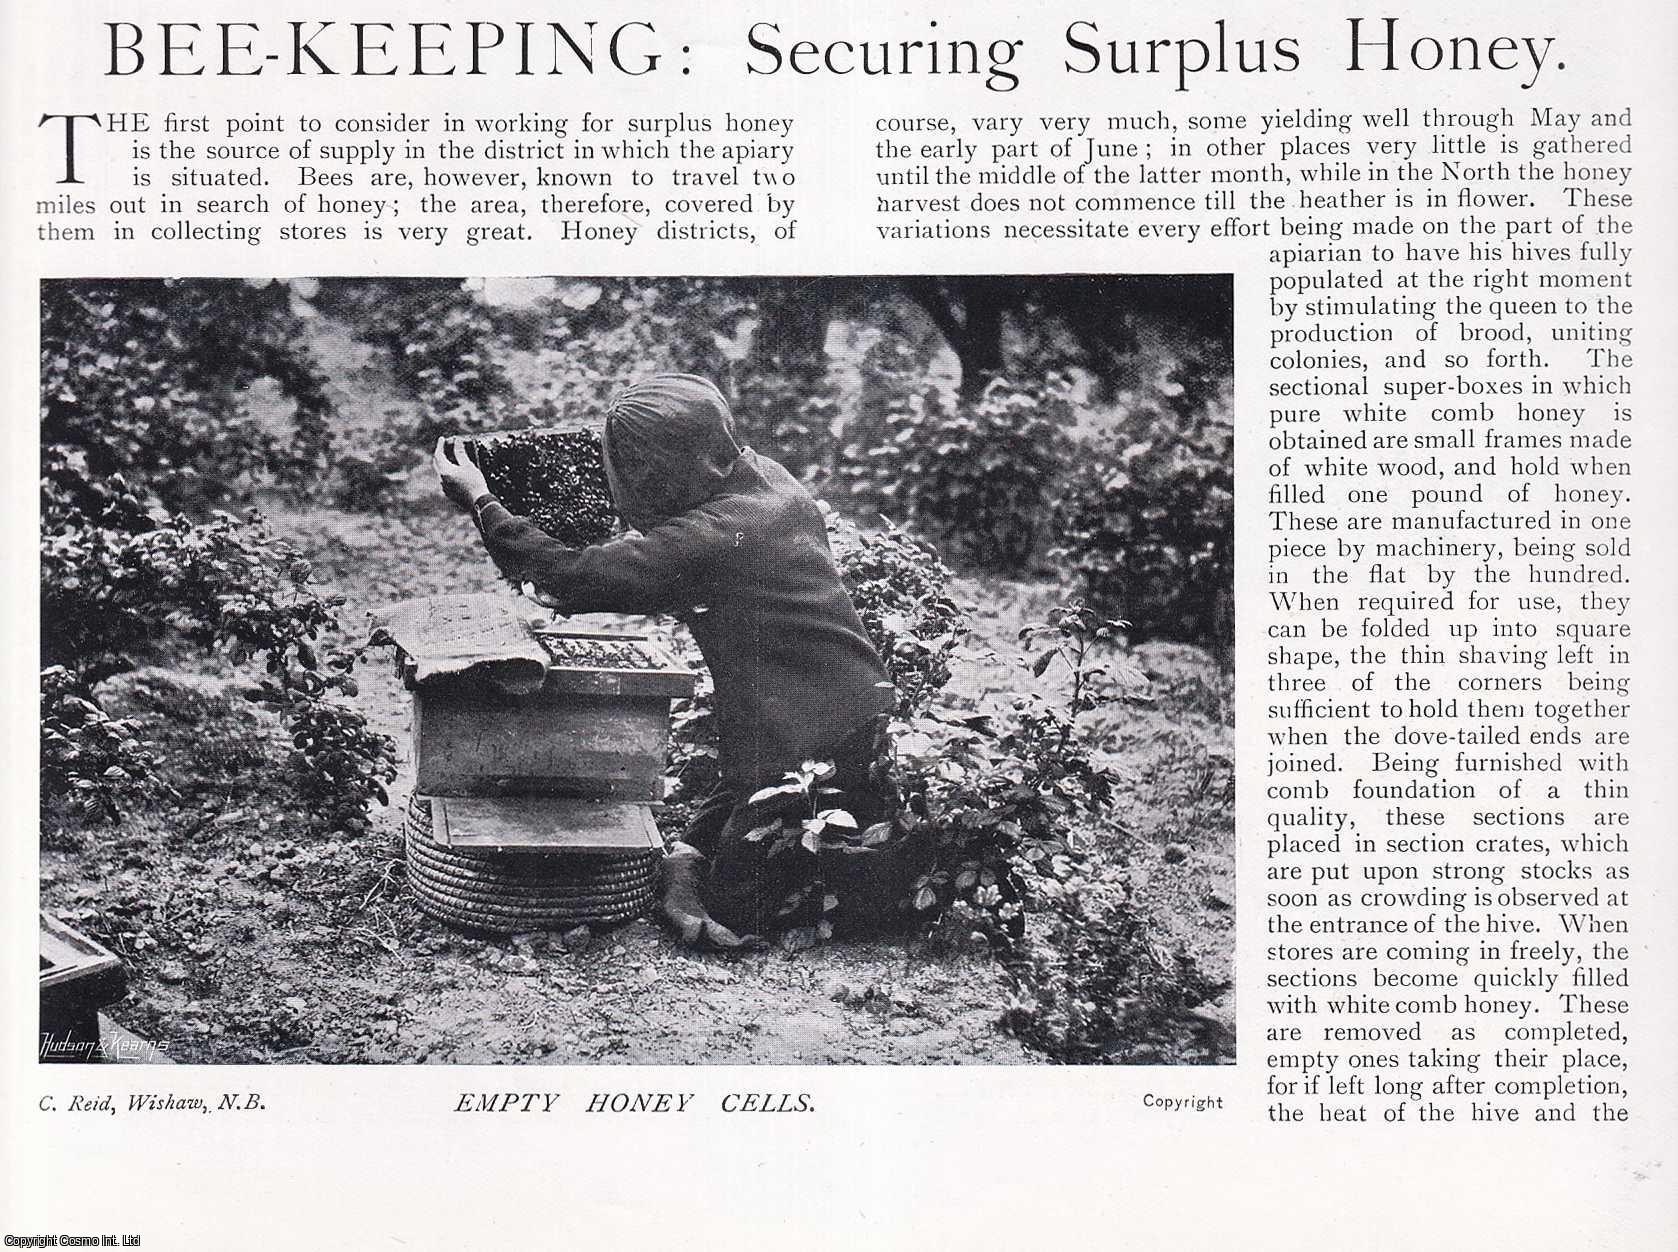 COUNTRY LIFE - Bee-Keeping: Securing Surplus Honey. Several pictures and accompanying text, removed from an original issue of Country Life Magazine, 1898.